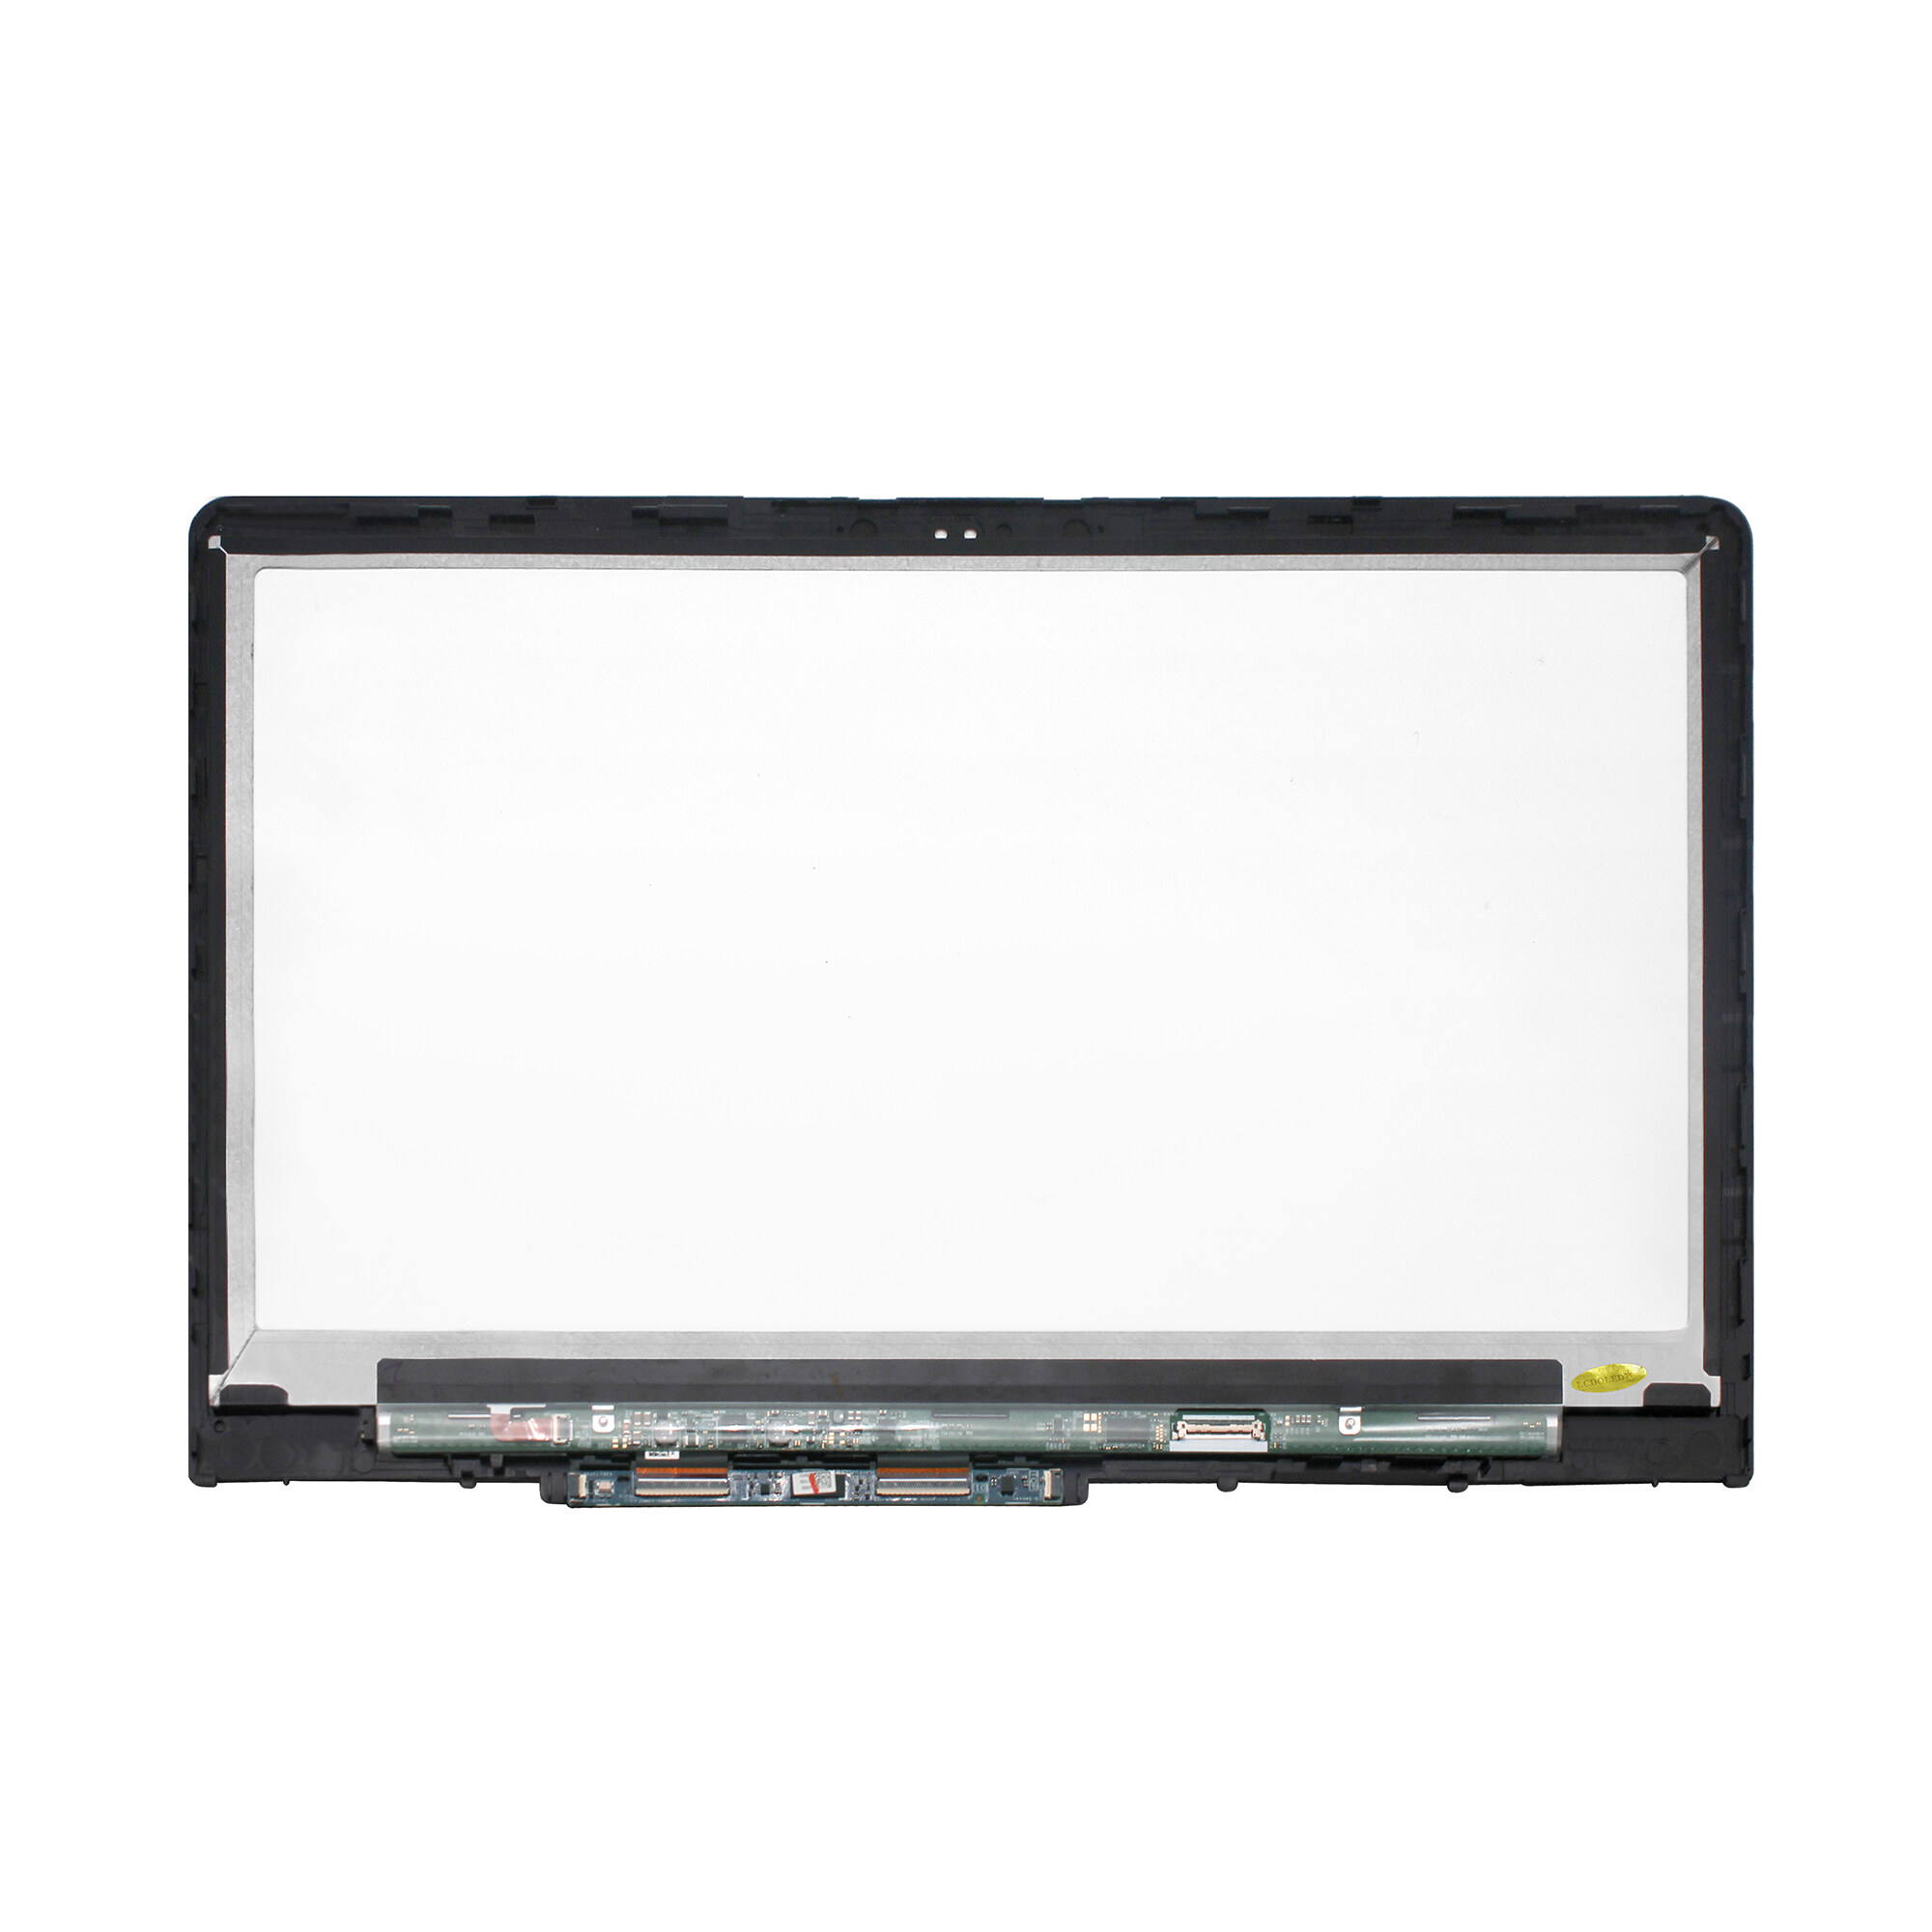 Kreplacement LED LCD Touch Screen Display Assembly+Bezelfor HP Pavilion x360 15-BR158CL 15-BR082WM 15-BR124TX 15-BR010TX 15-br016ng 15-br095ms 15-br013na 15-br002cy 15-br158cl 15-br080WM